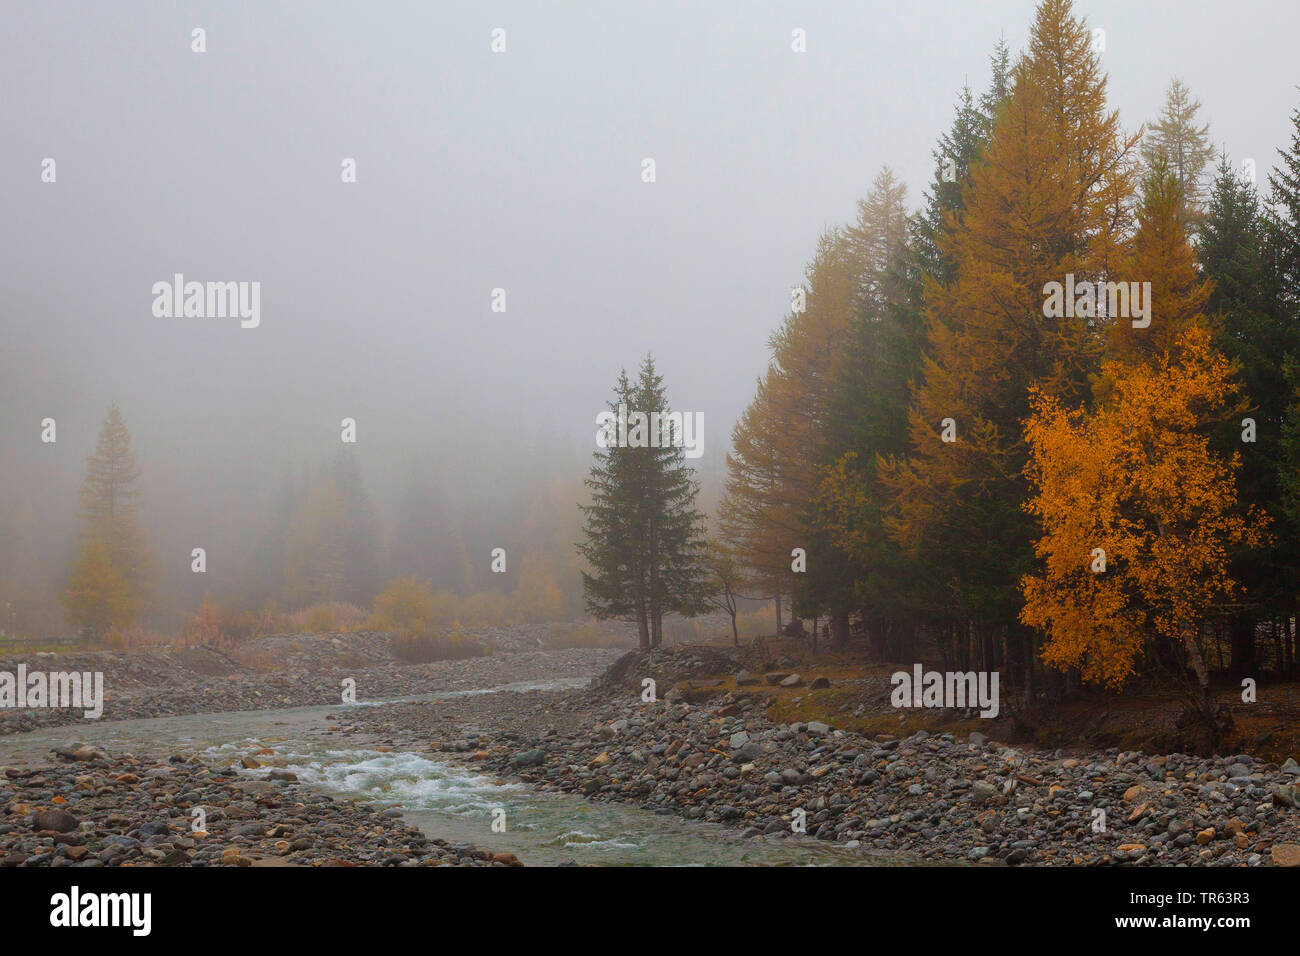 river in the valley of Valnontey, autumn colouring of the trees, Italy, Aosta, Gran Paradiso National Park Stock Photo